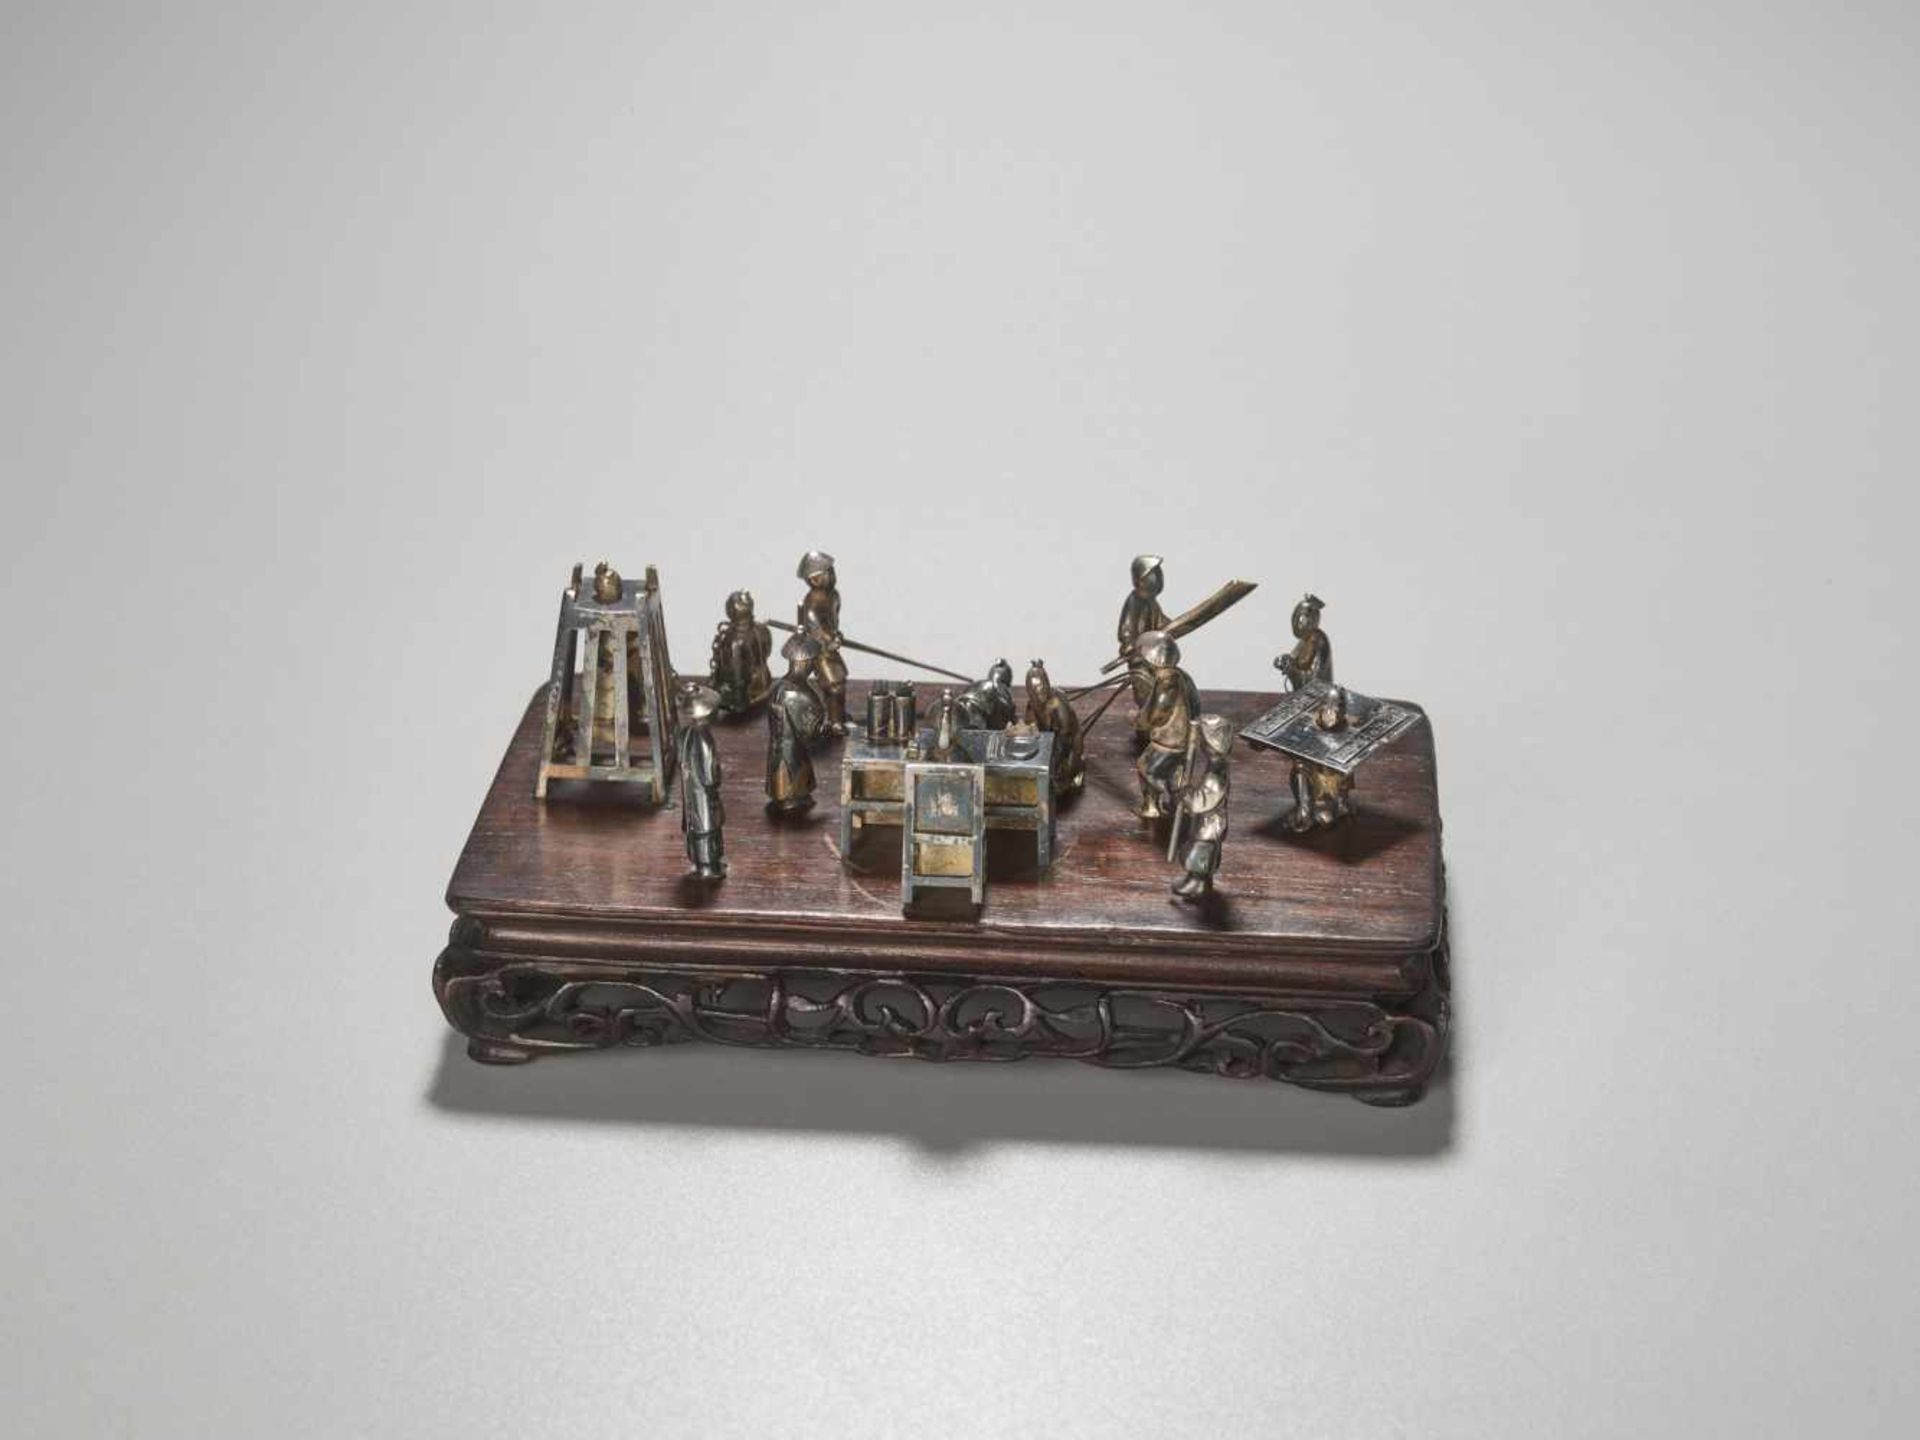 A QING DYNASTY SILVER MINIATURE GROUP ‘MAGISTRATE HOLDING COURT’ Silver and metal, wooden base - Image 9 of 9